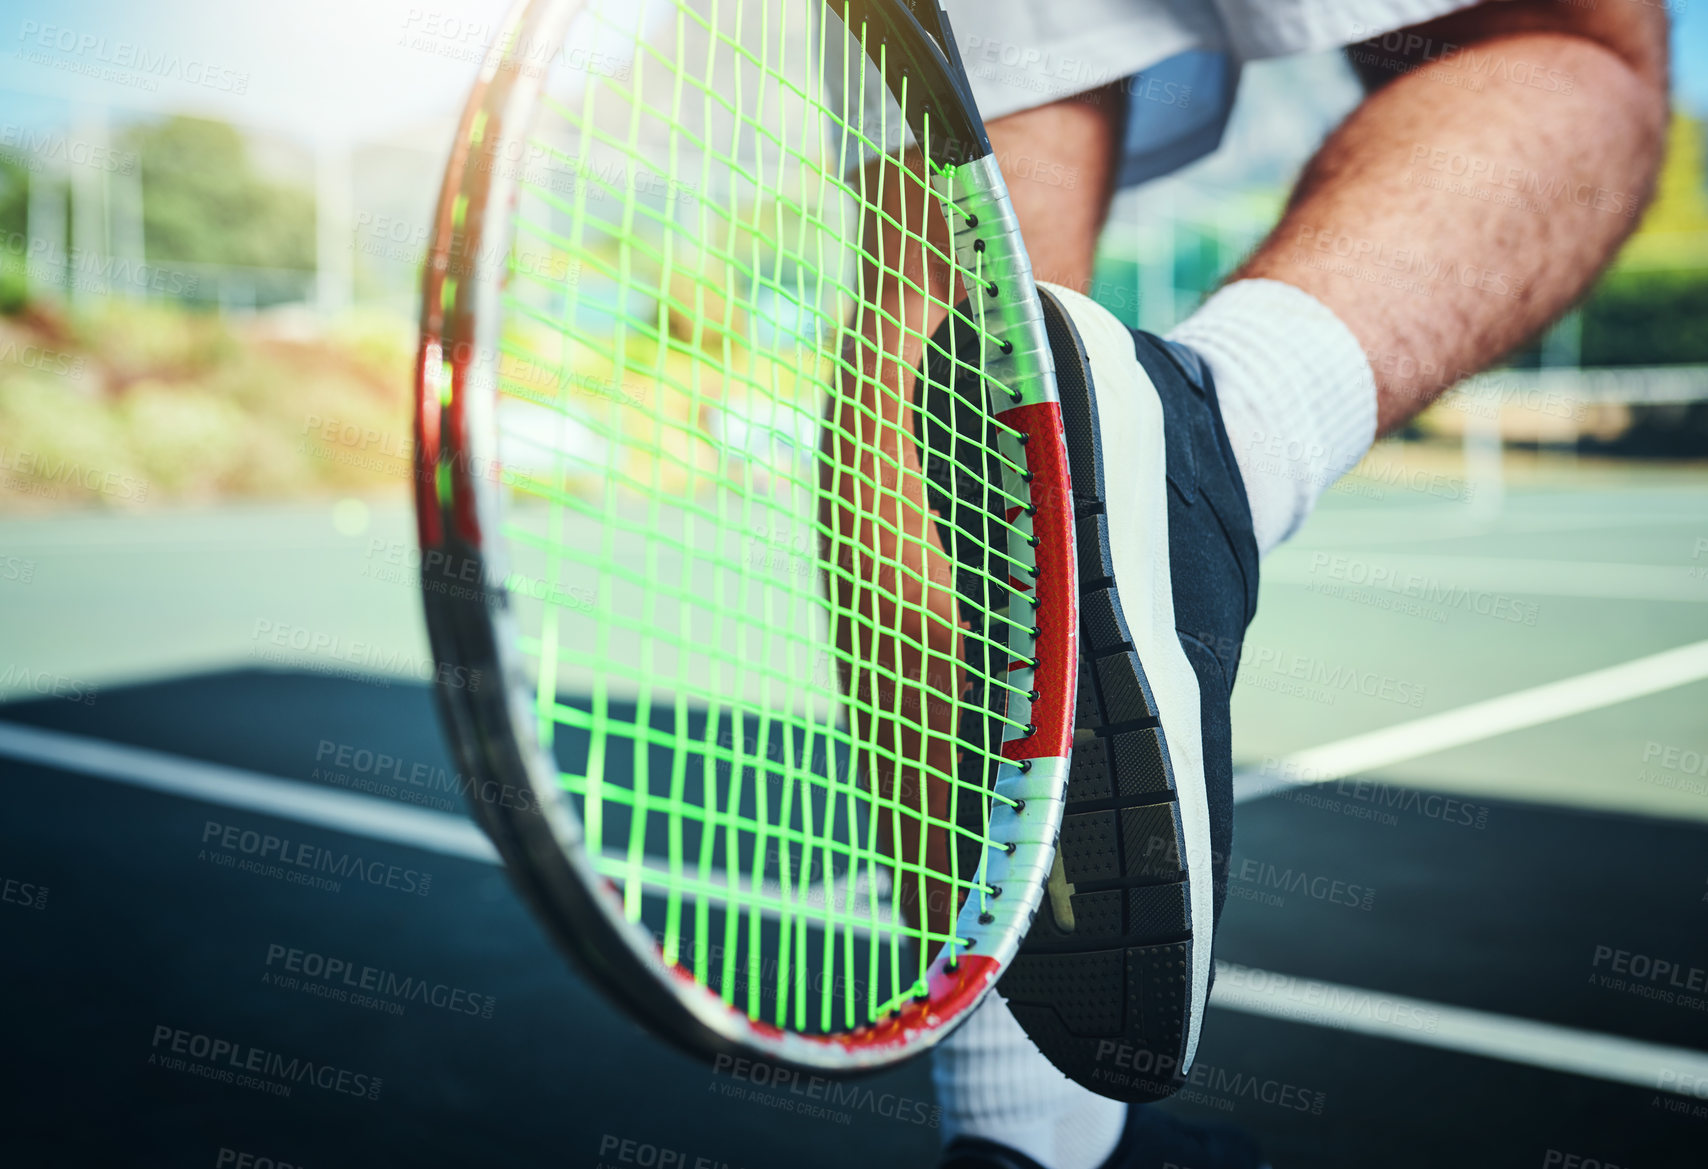 Buy stock photo Cropped shot of an unrecognizable male tennis player kicking his tennis racket outdoors on a tennis court